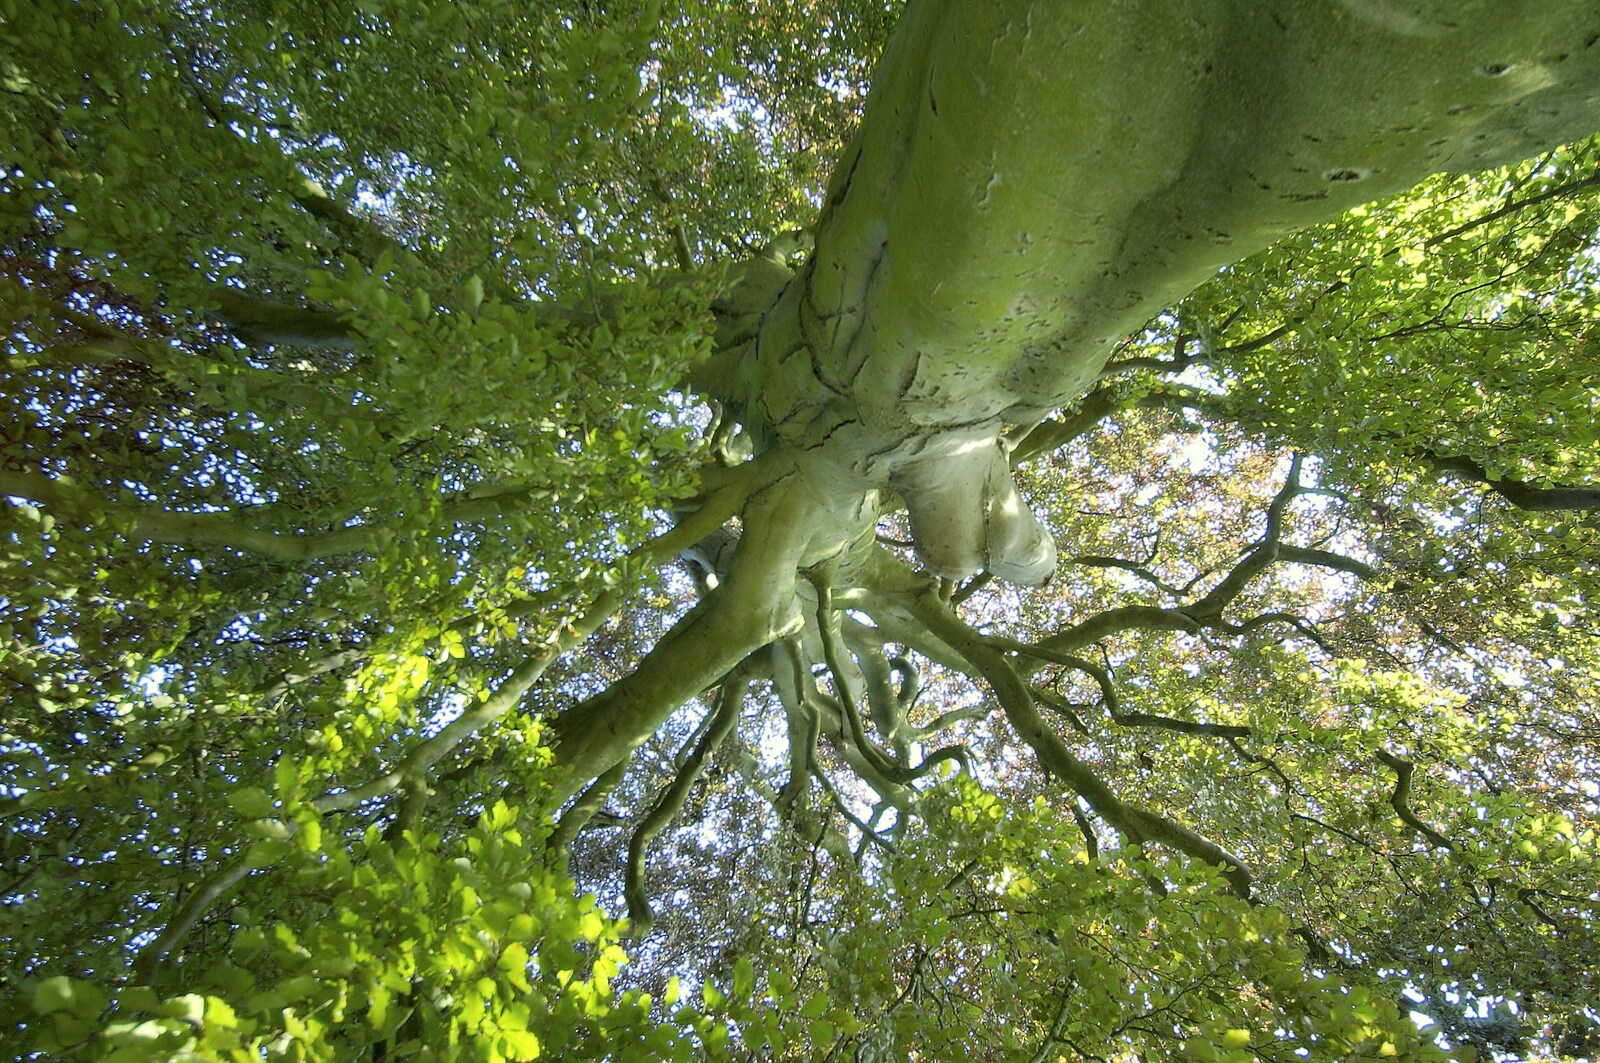 A fantastic tree, taken from the ground looking up from A Picnic by the Castle on a Hill, Framlingham, Suffolk - 17th June 2006